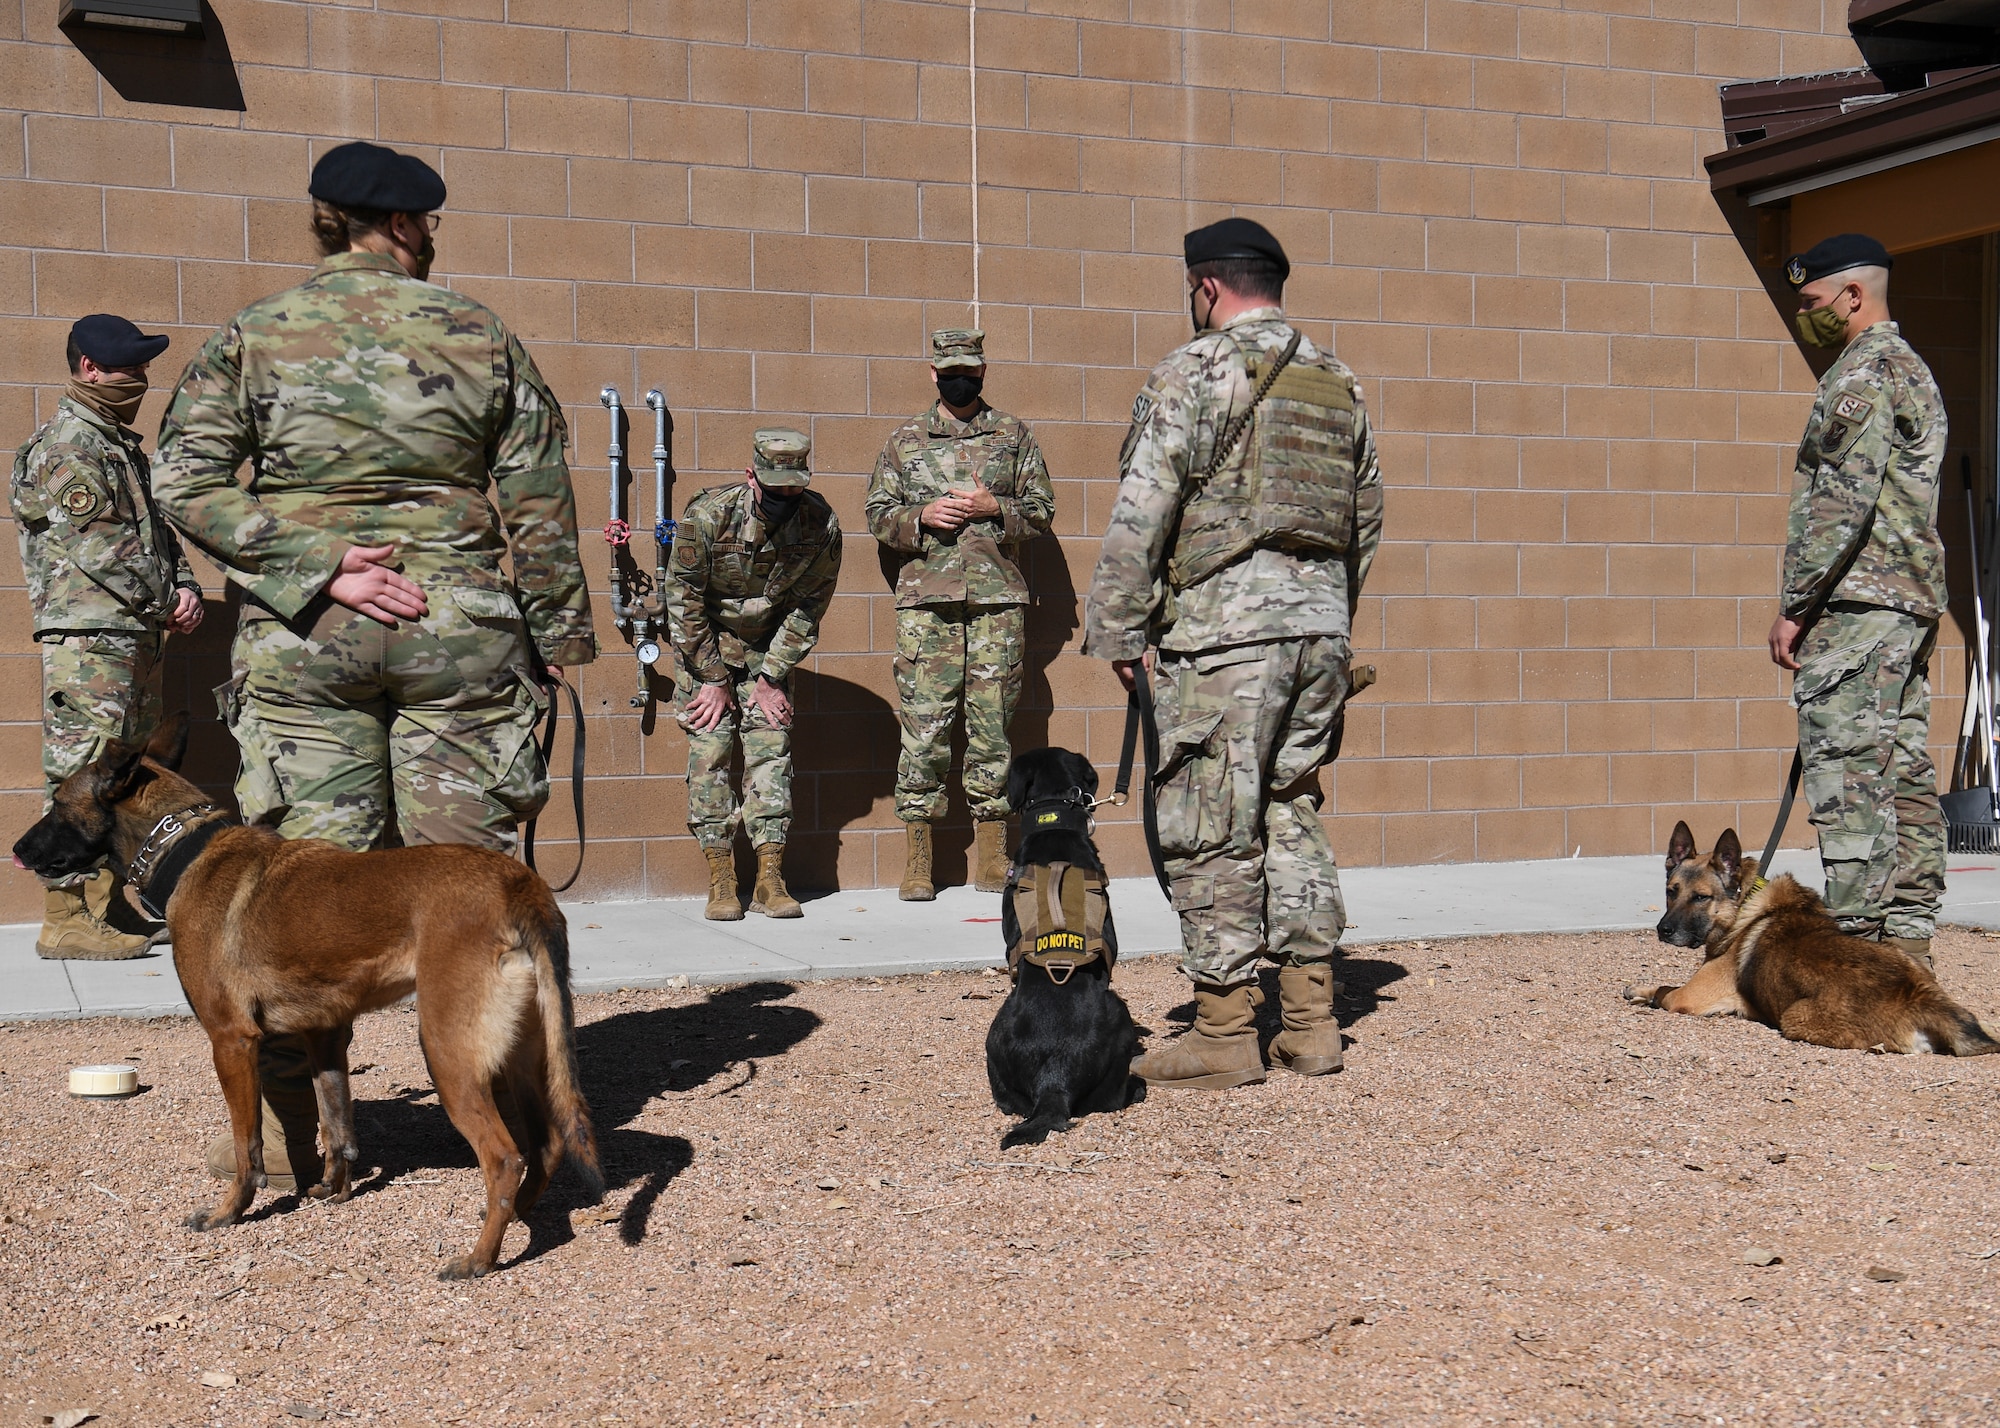 U.S. Air Force Maj. Gen. Michael J. Lutton, 20th Air Force commander, meets several military working dogs.